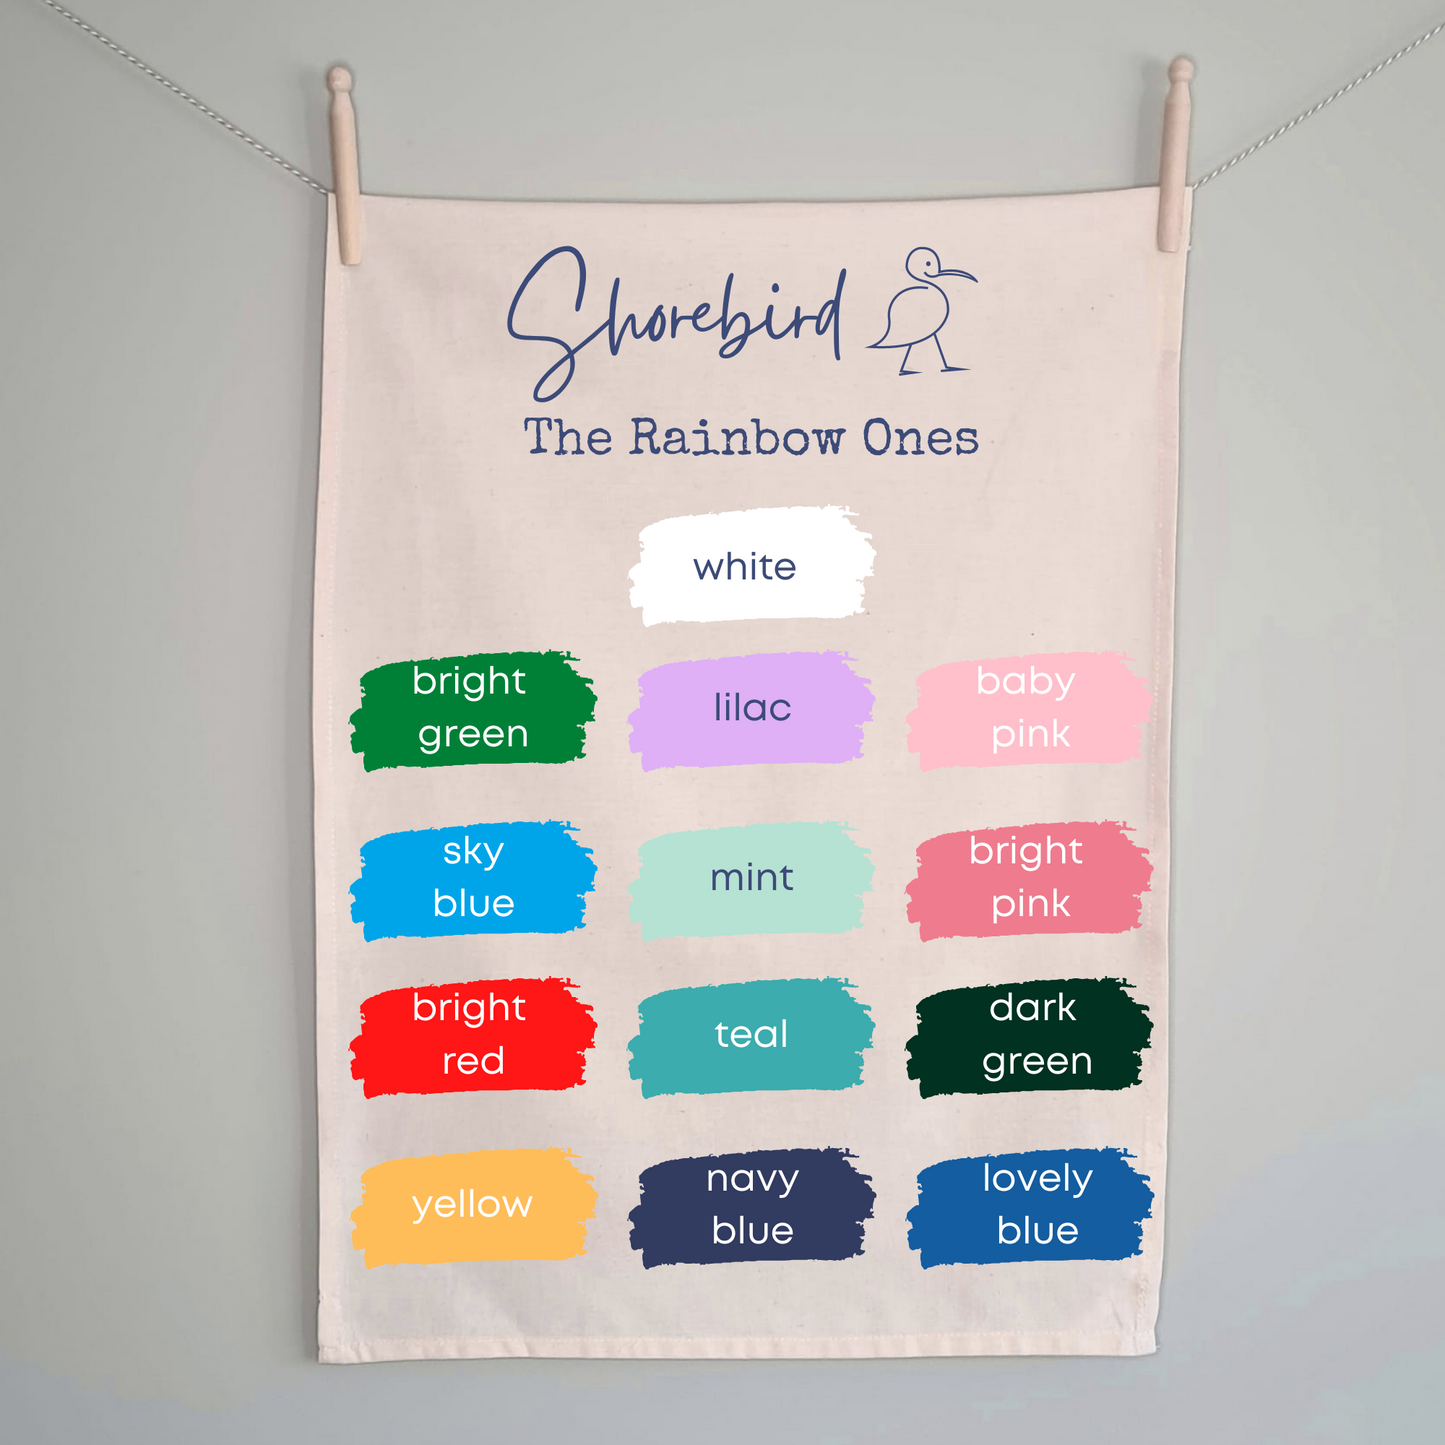 You Are Going To Be A Grandfather Tea Towel - 100% Organic Cotton